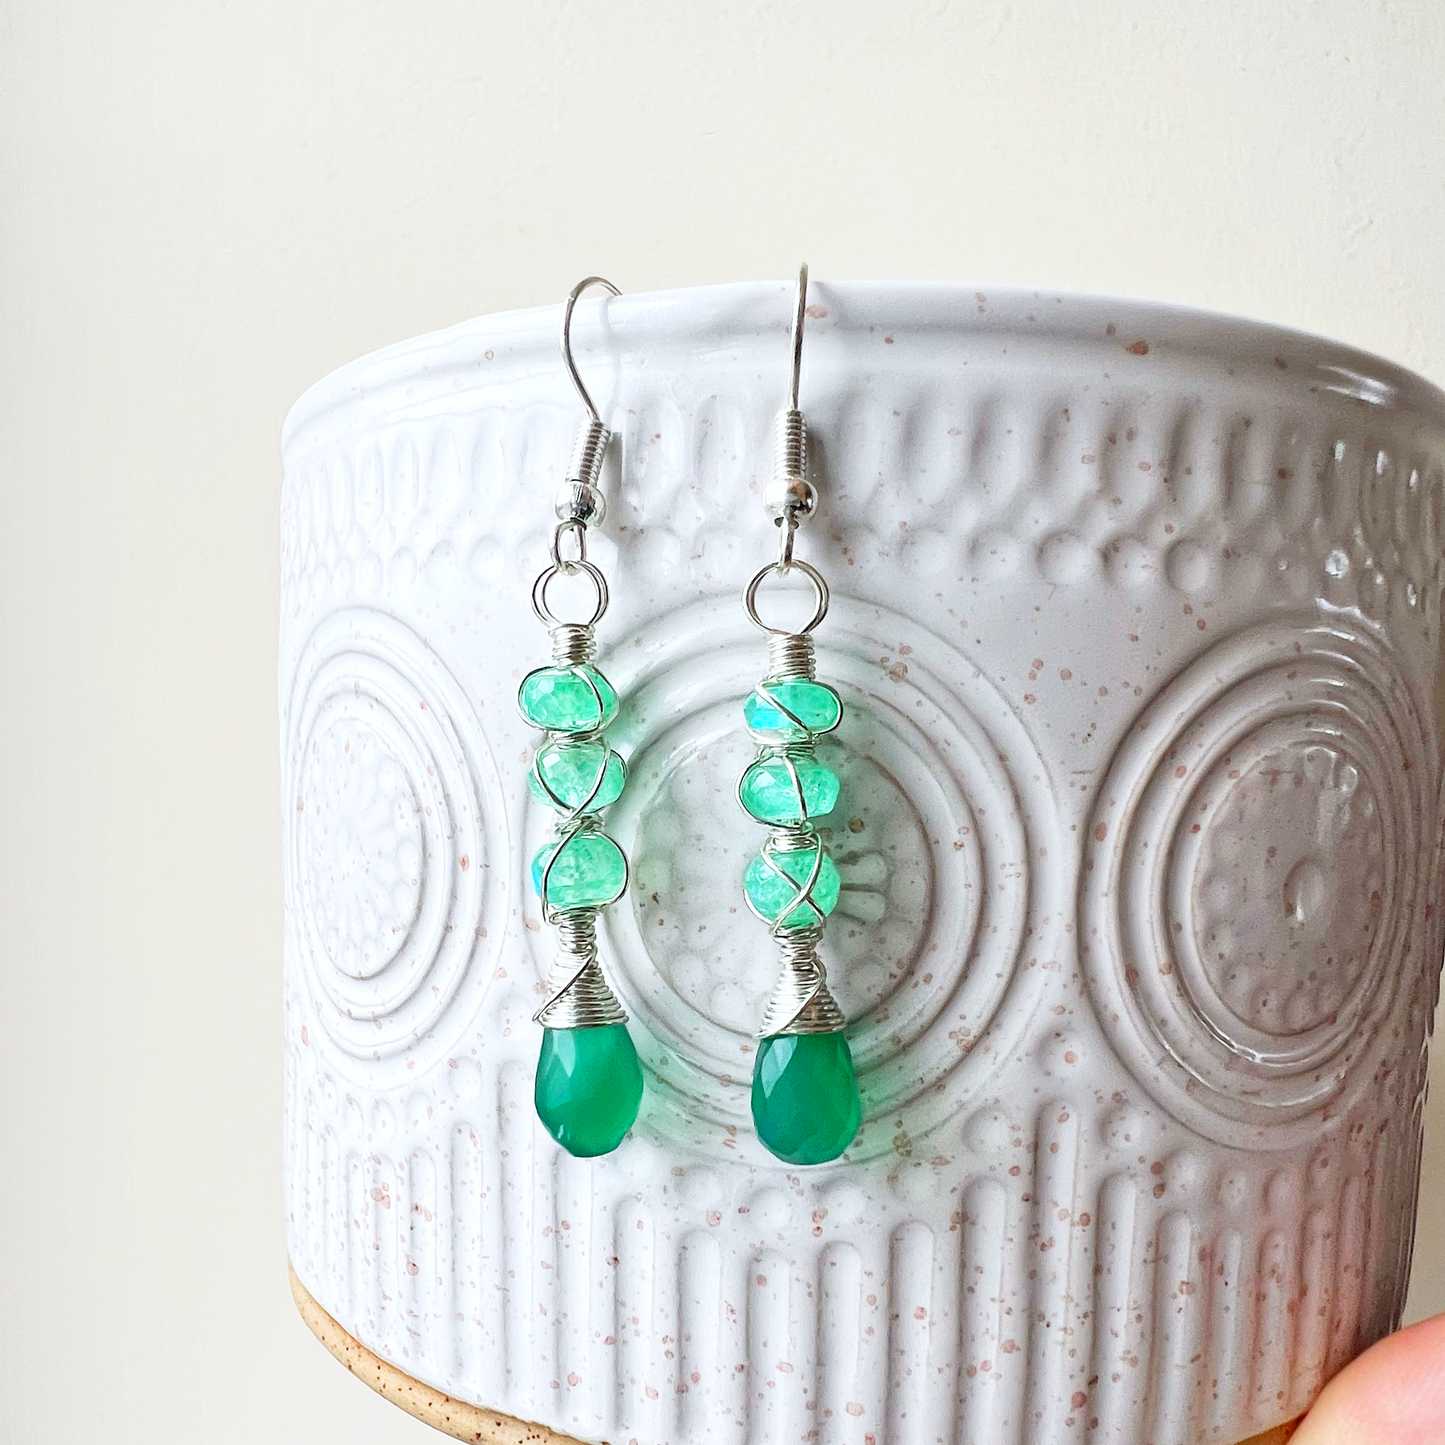 Twisted kisses earrings - Green Onyx and green rainbow moonstone